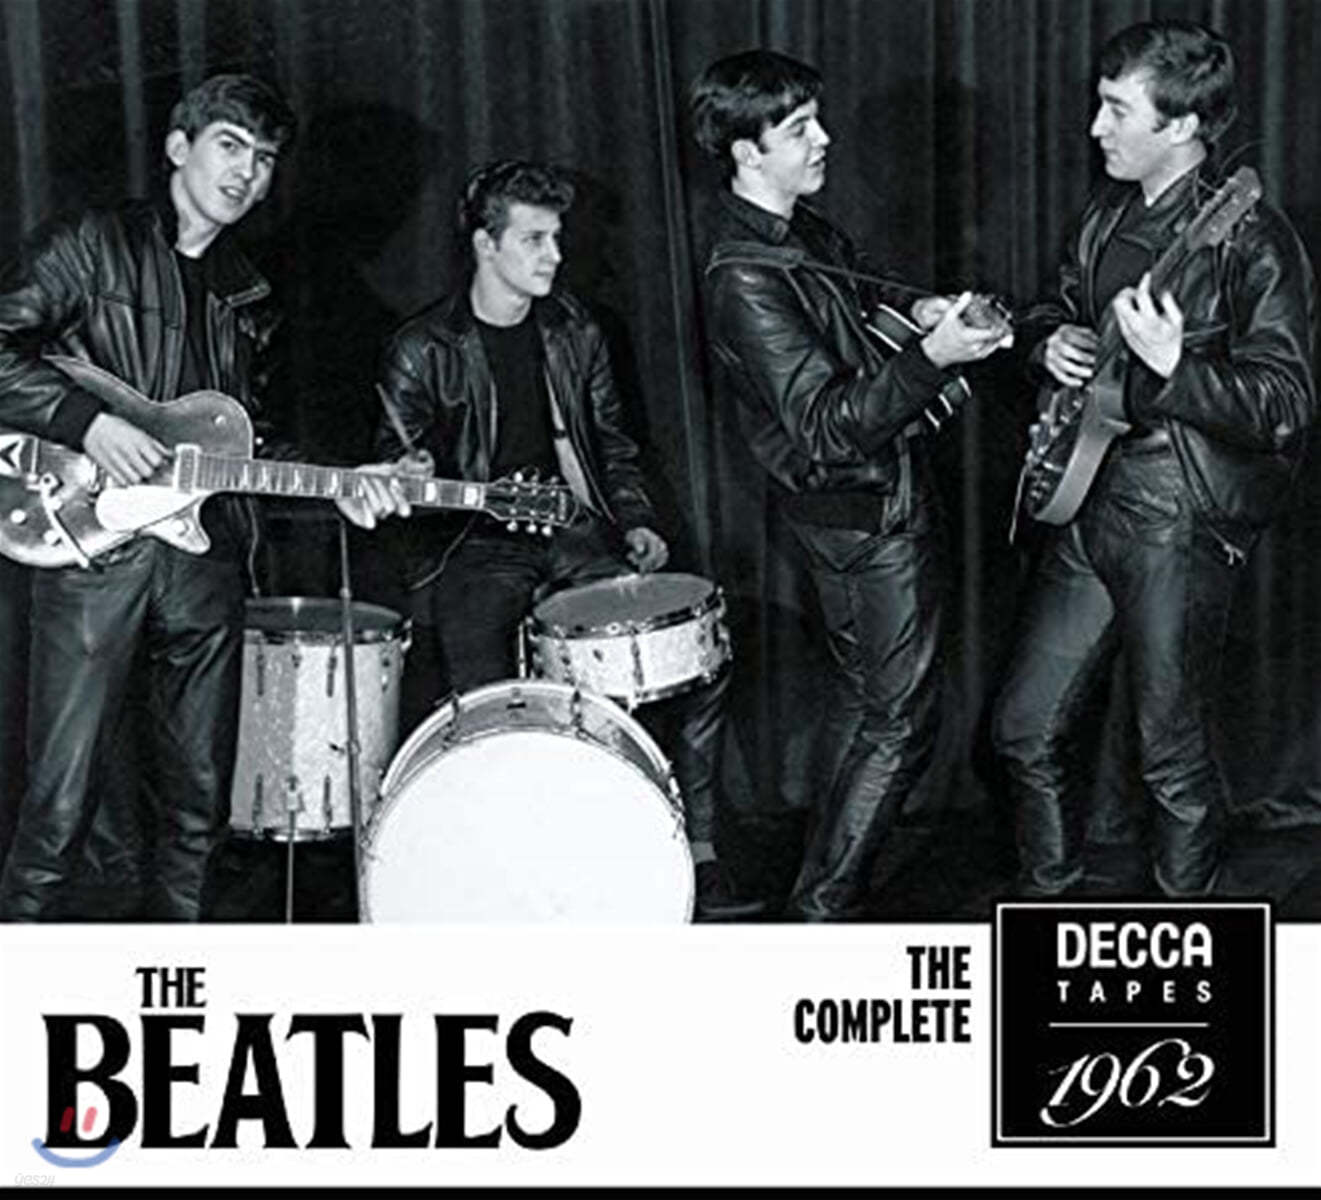 The Beatles (비틀즈) - The Complete Decca Tapes 1962